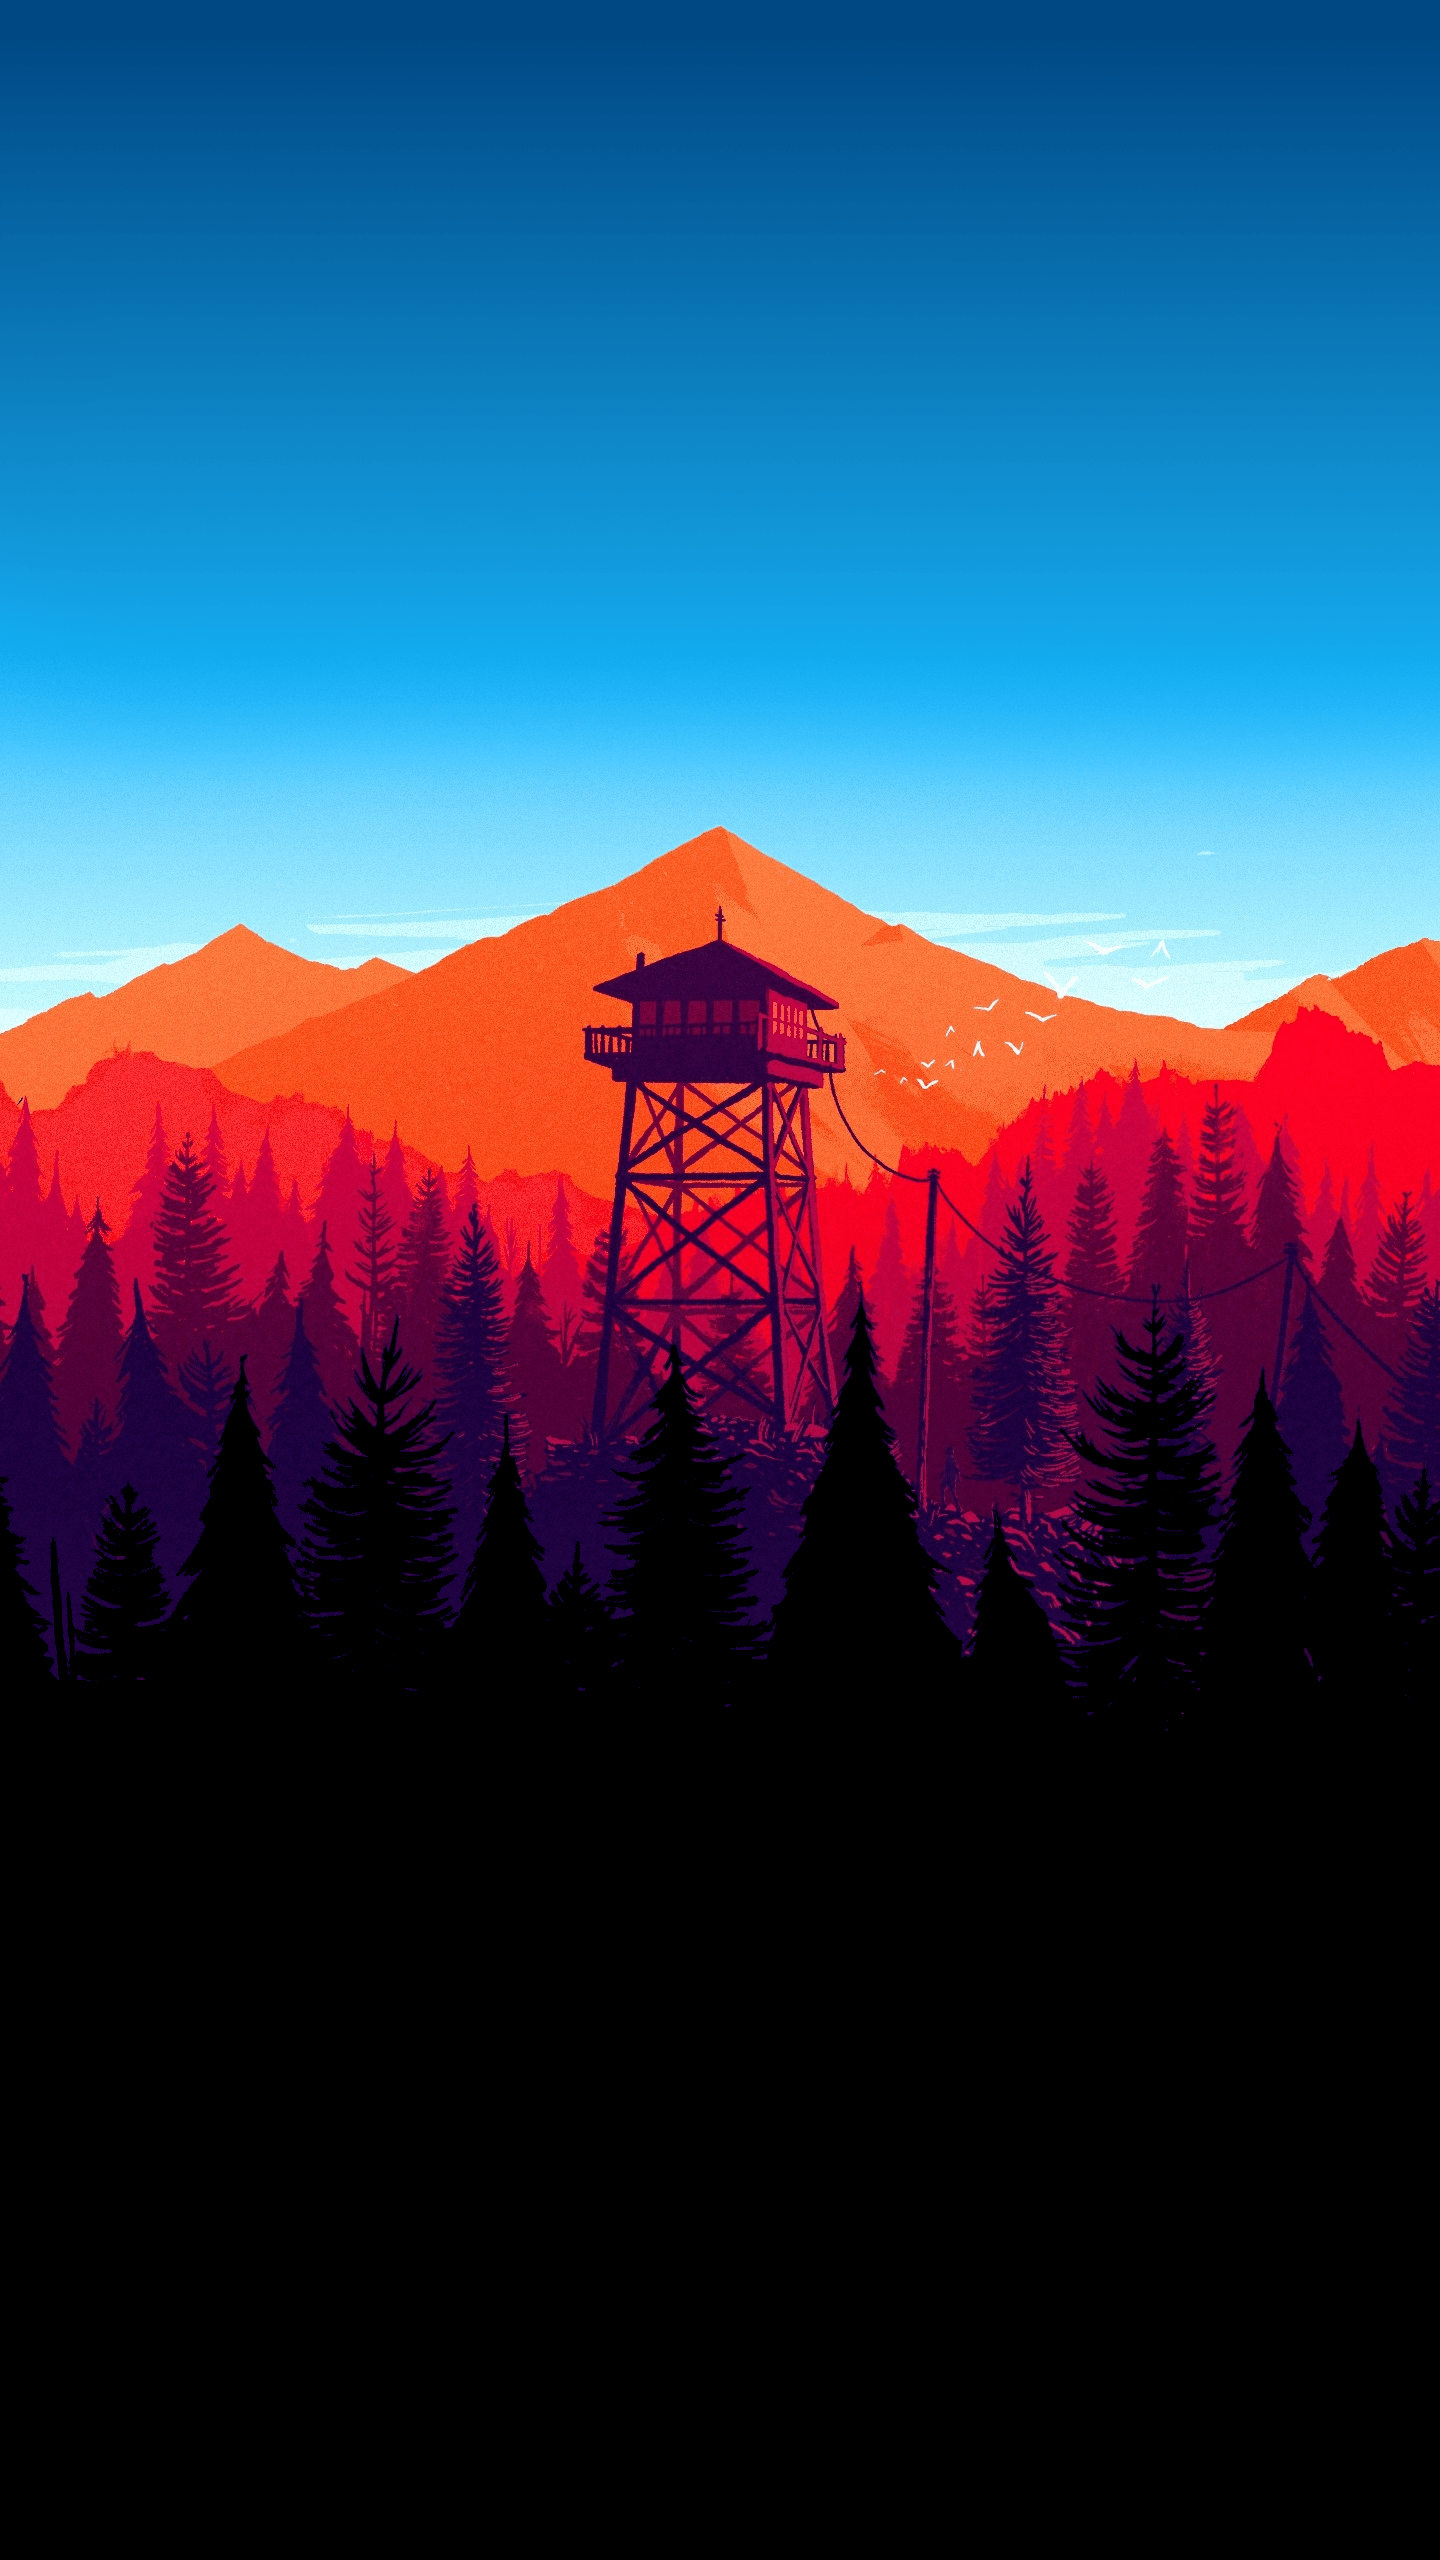 Firewatch Tower With Blue Skies X Post From R AmoledBackground